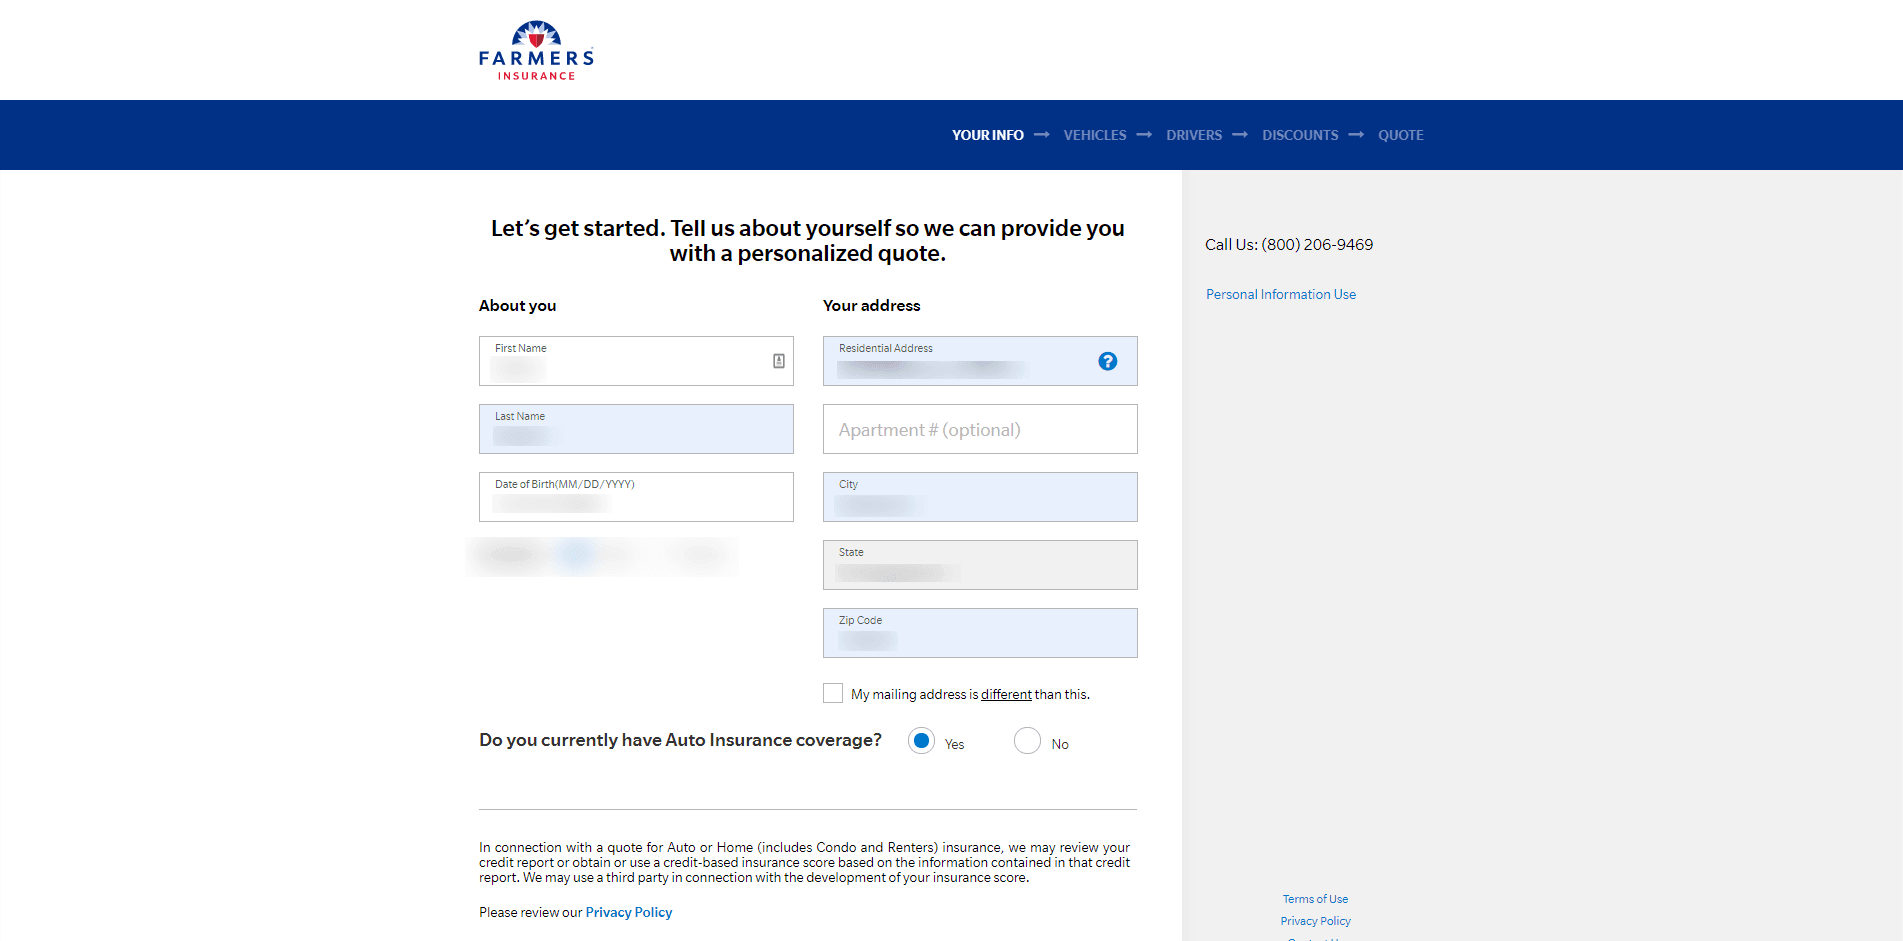 Phone Number For Farmers Insurance Near Me Farmers